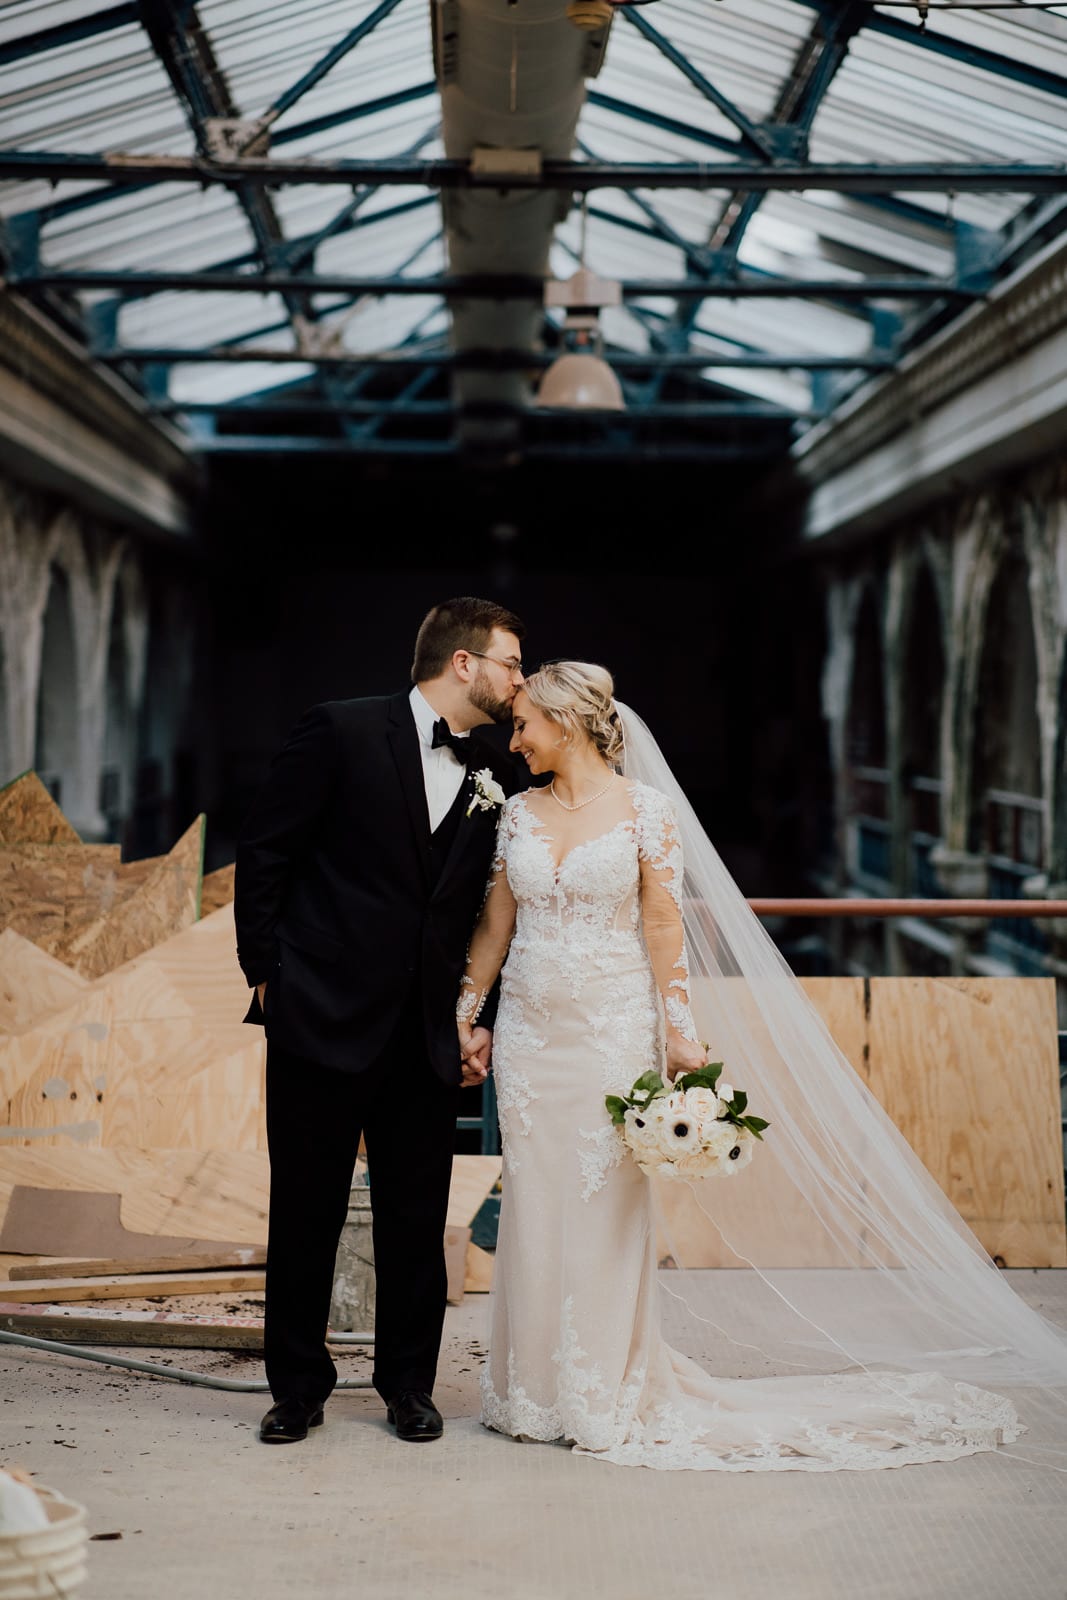 Bride and groom pose in urban construction project